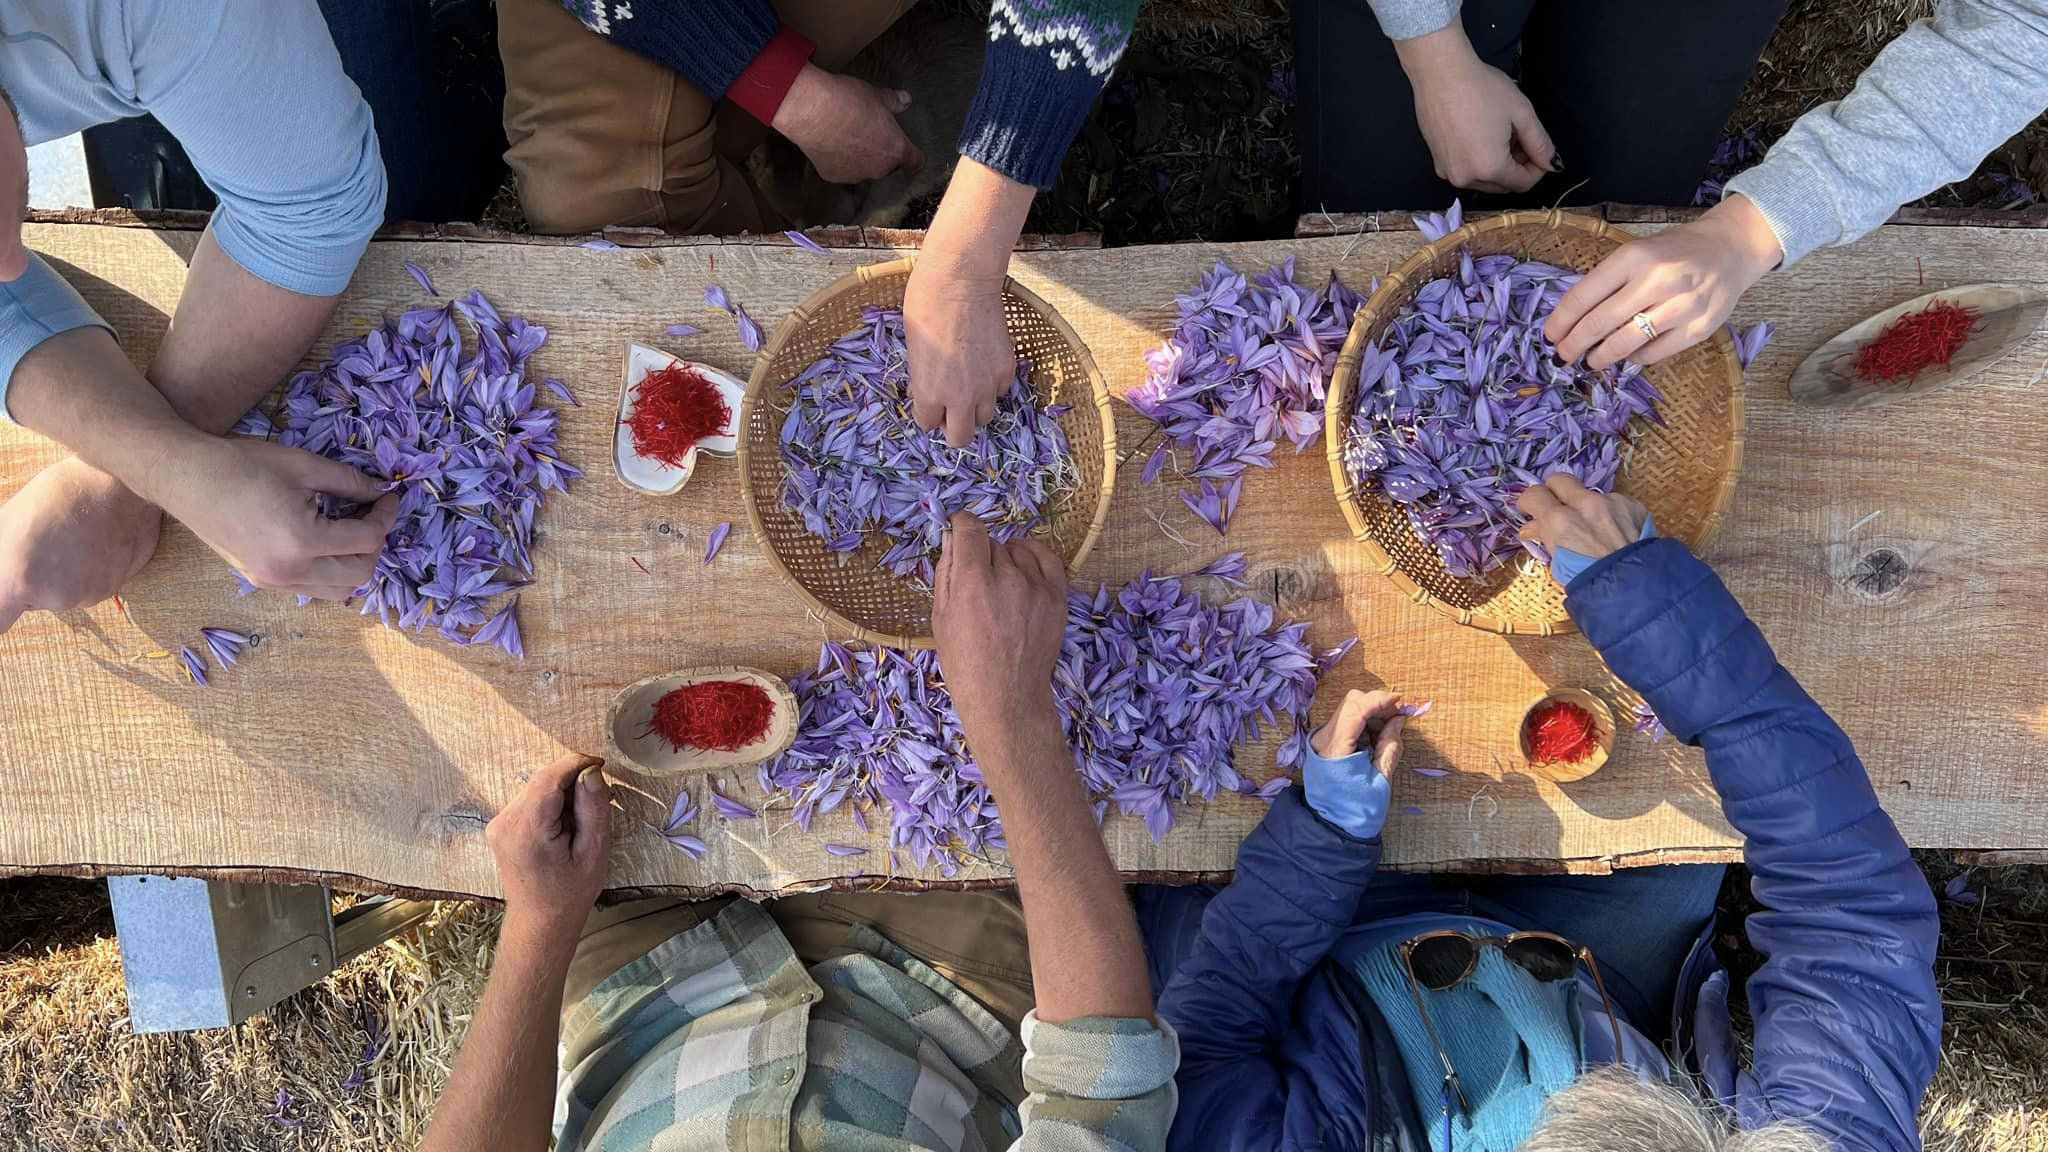 Workers harvest saffron flowers at Peace and Plenty Farm in Lake County, CA